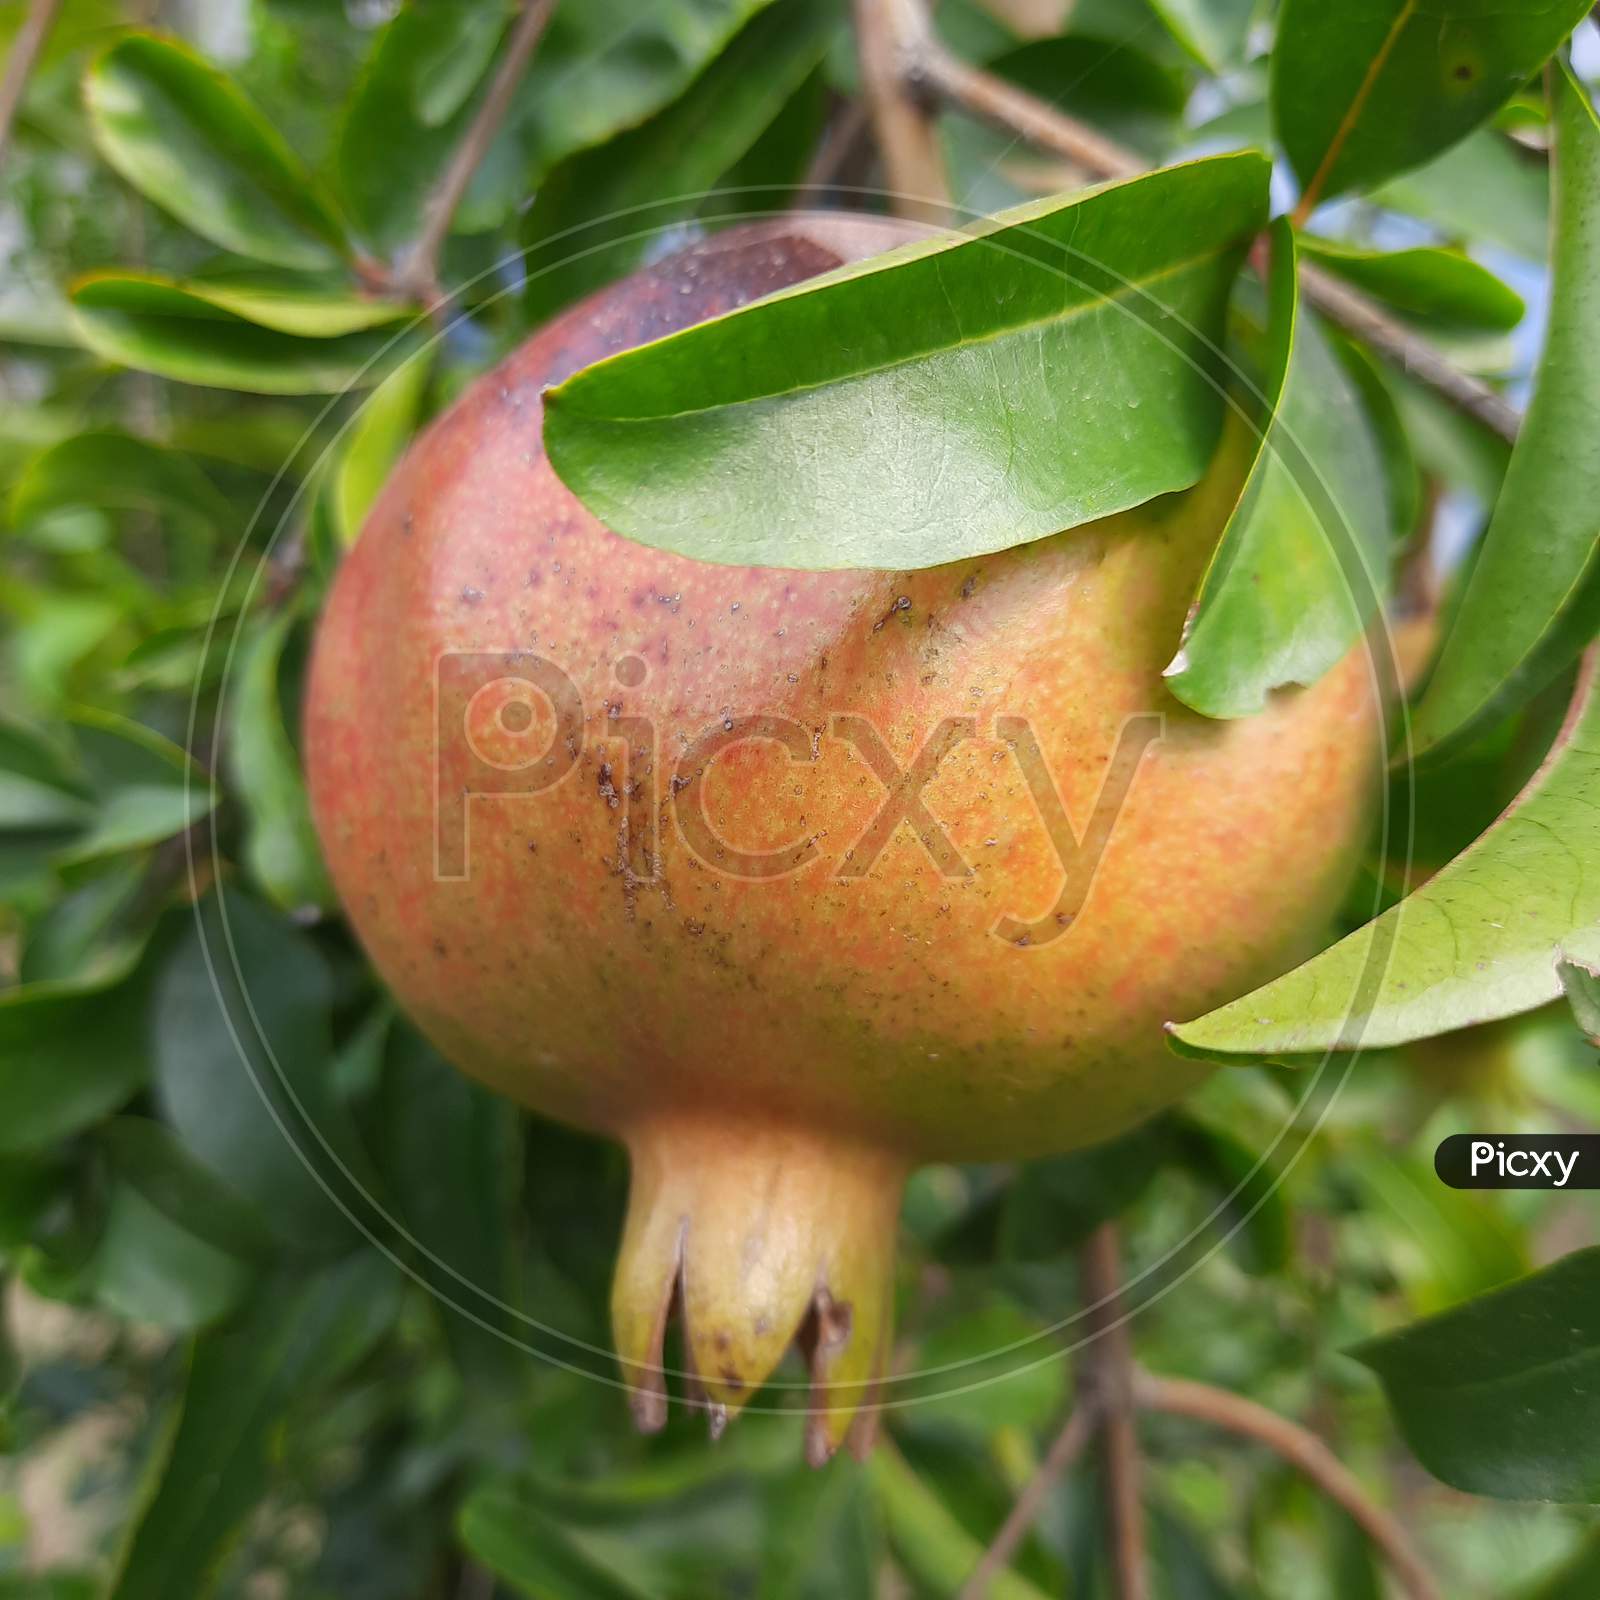 Pomogranate grown without any pesticides, naturally grown in backyard in India